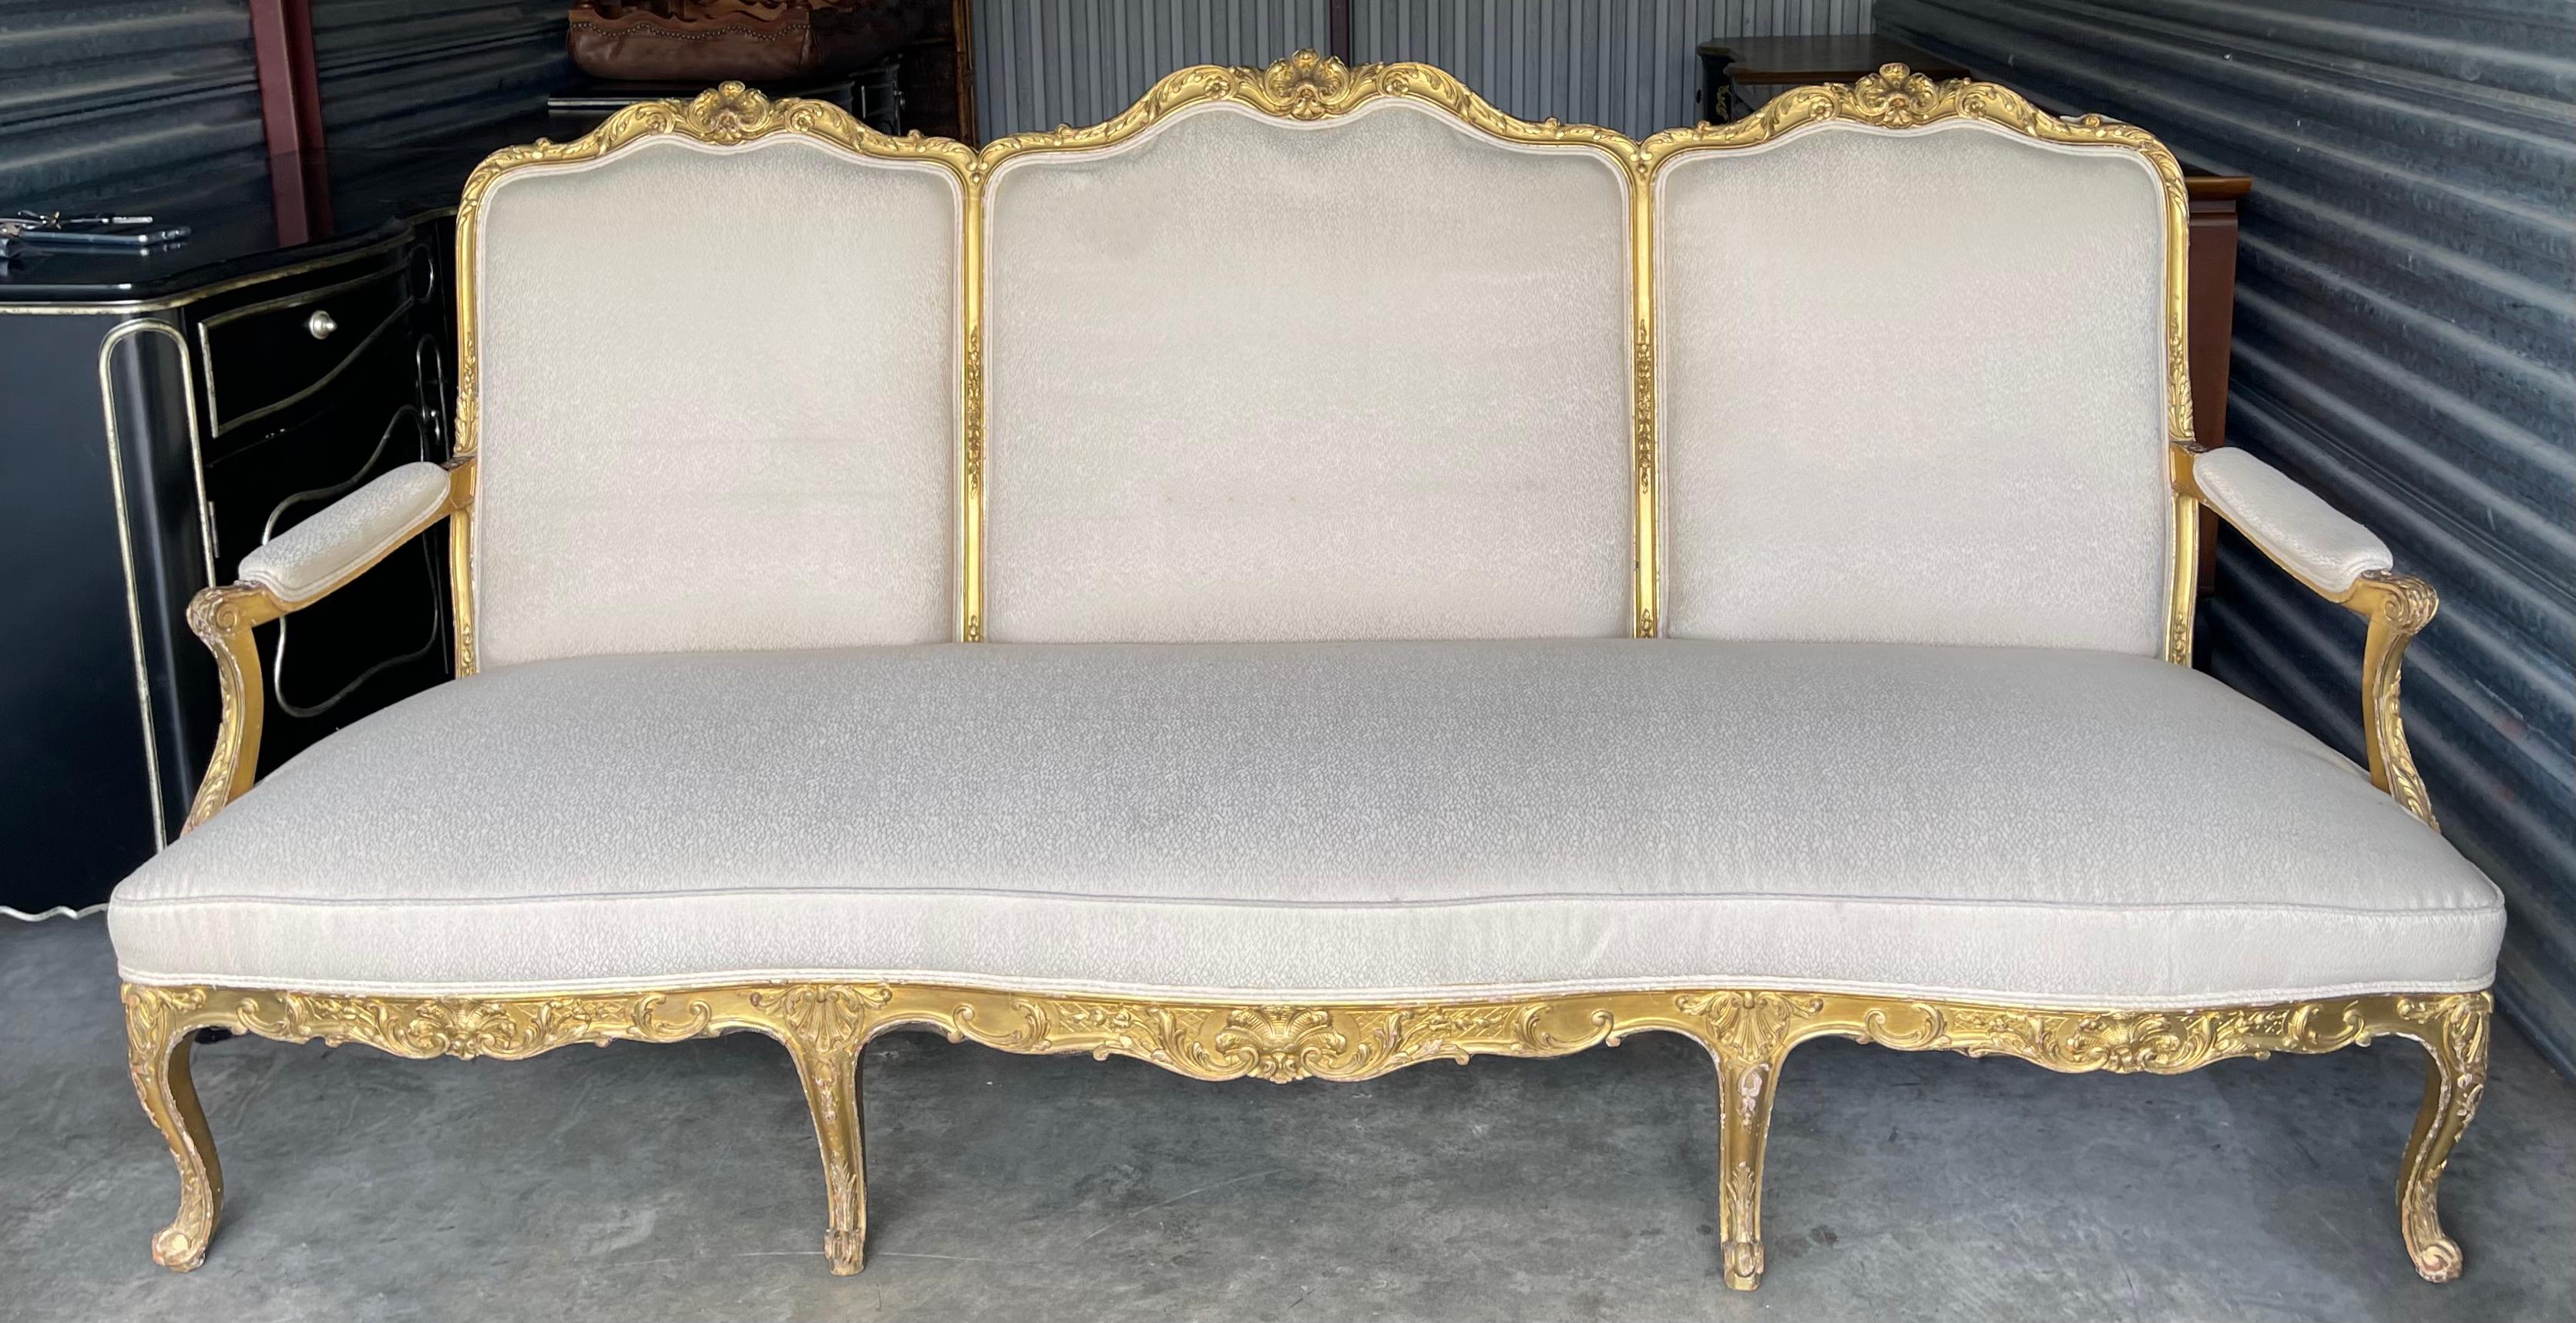 Upholstery Antique French Louis Xv Style Carved Giltwood Sofa For Sale